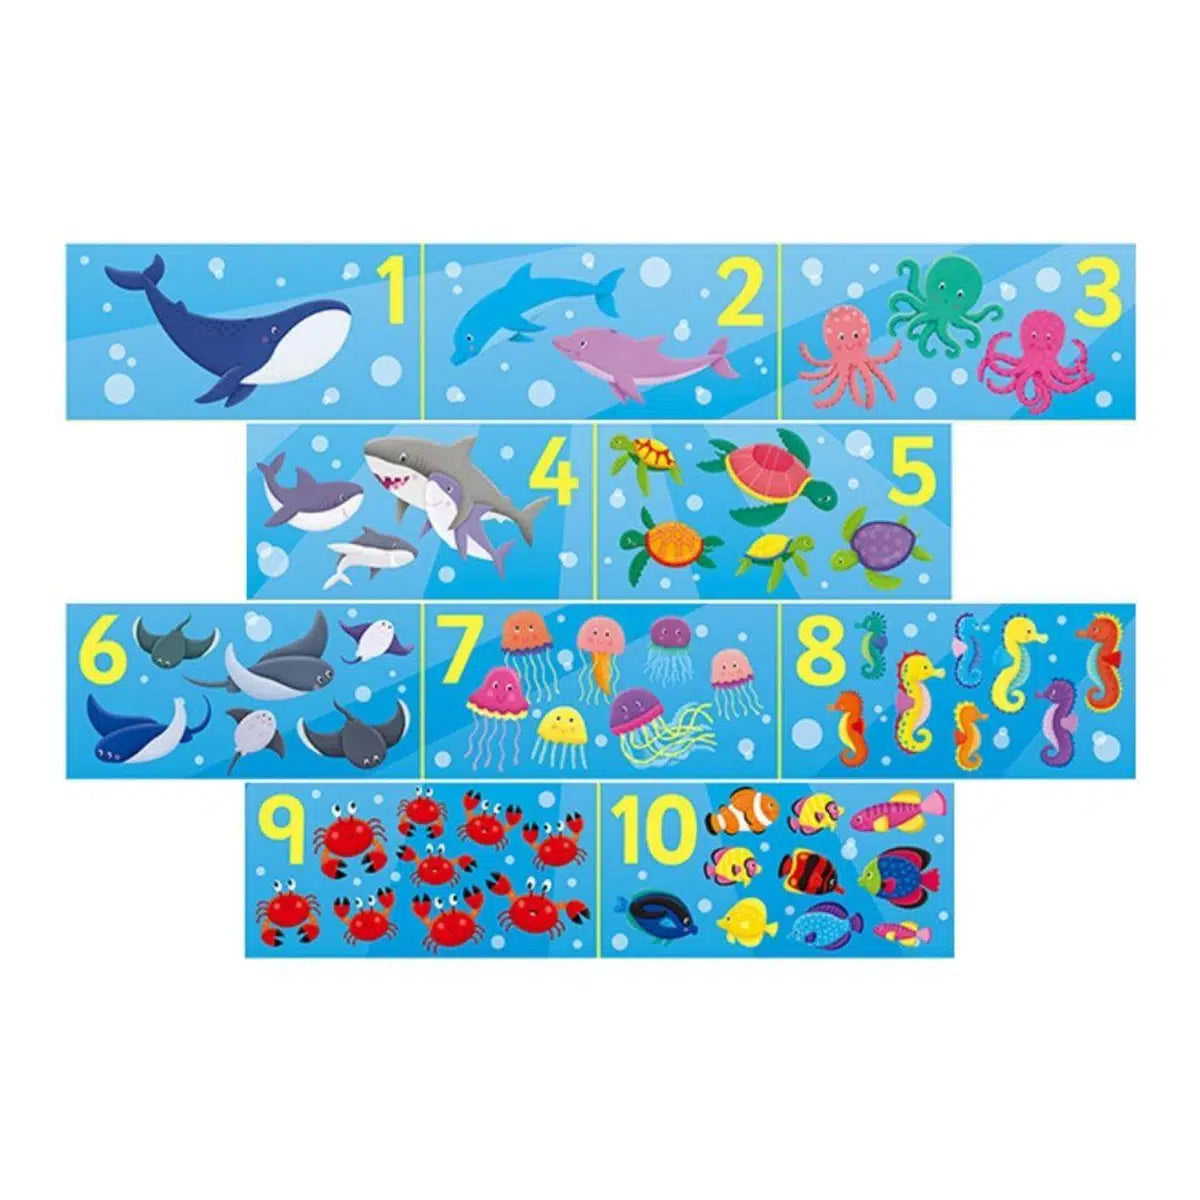 Galt Giant Floor Puzzles: Counting Creatures